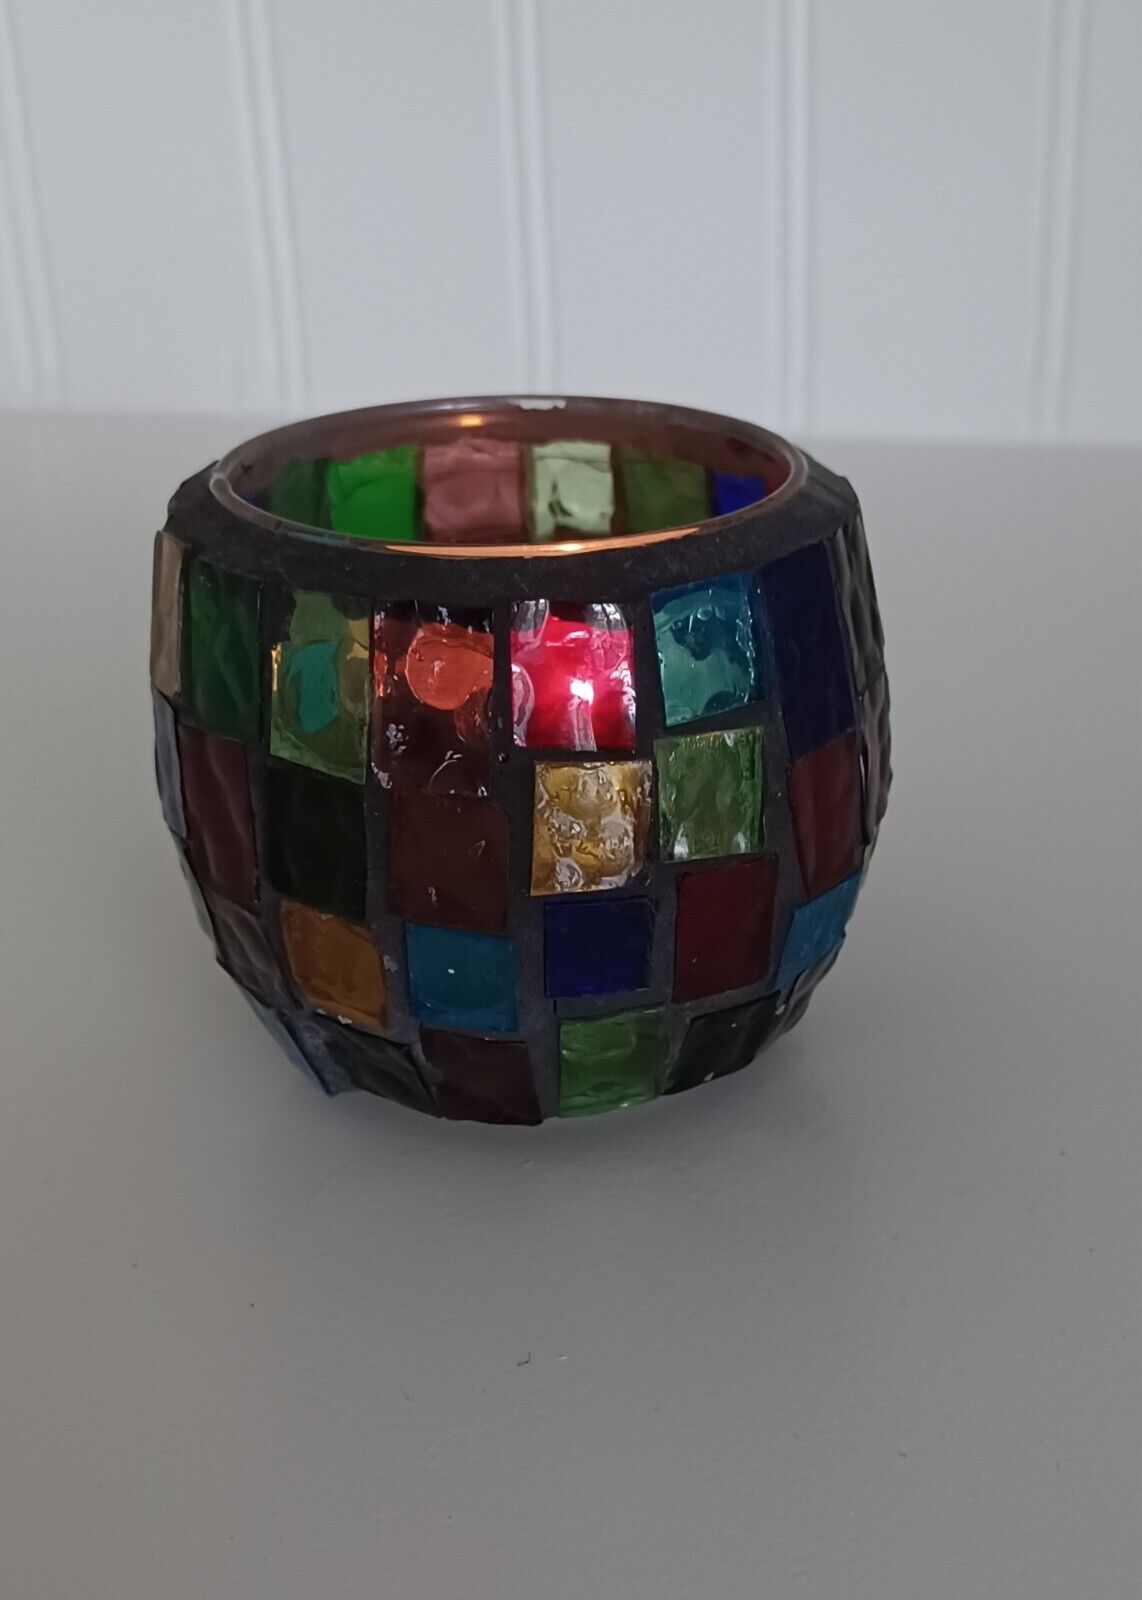 Vintage Stained Glass Mosaic Jewel-toned Votive Candle Holder